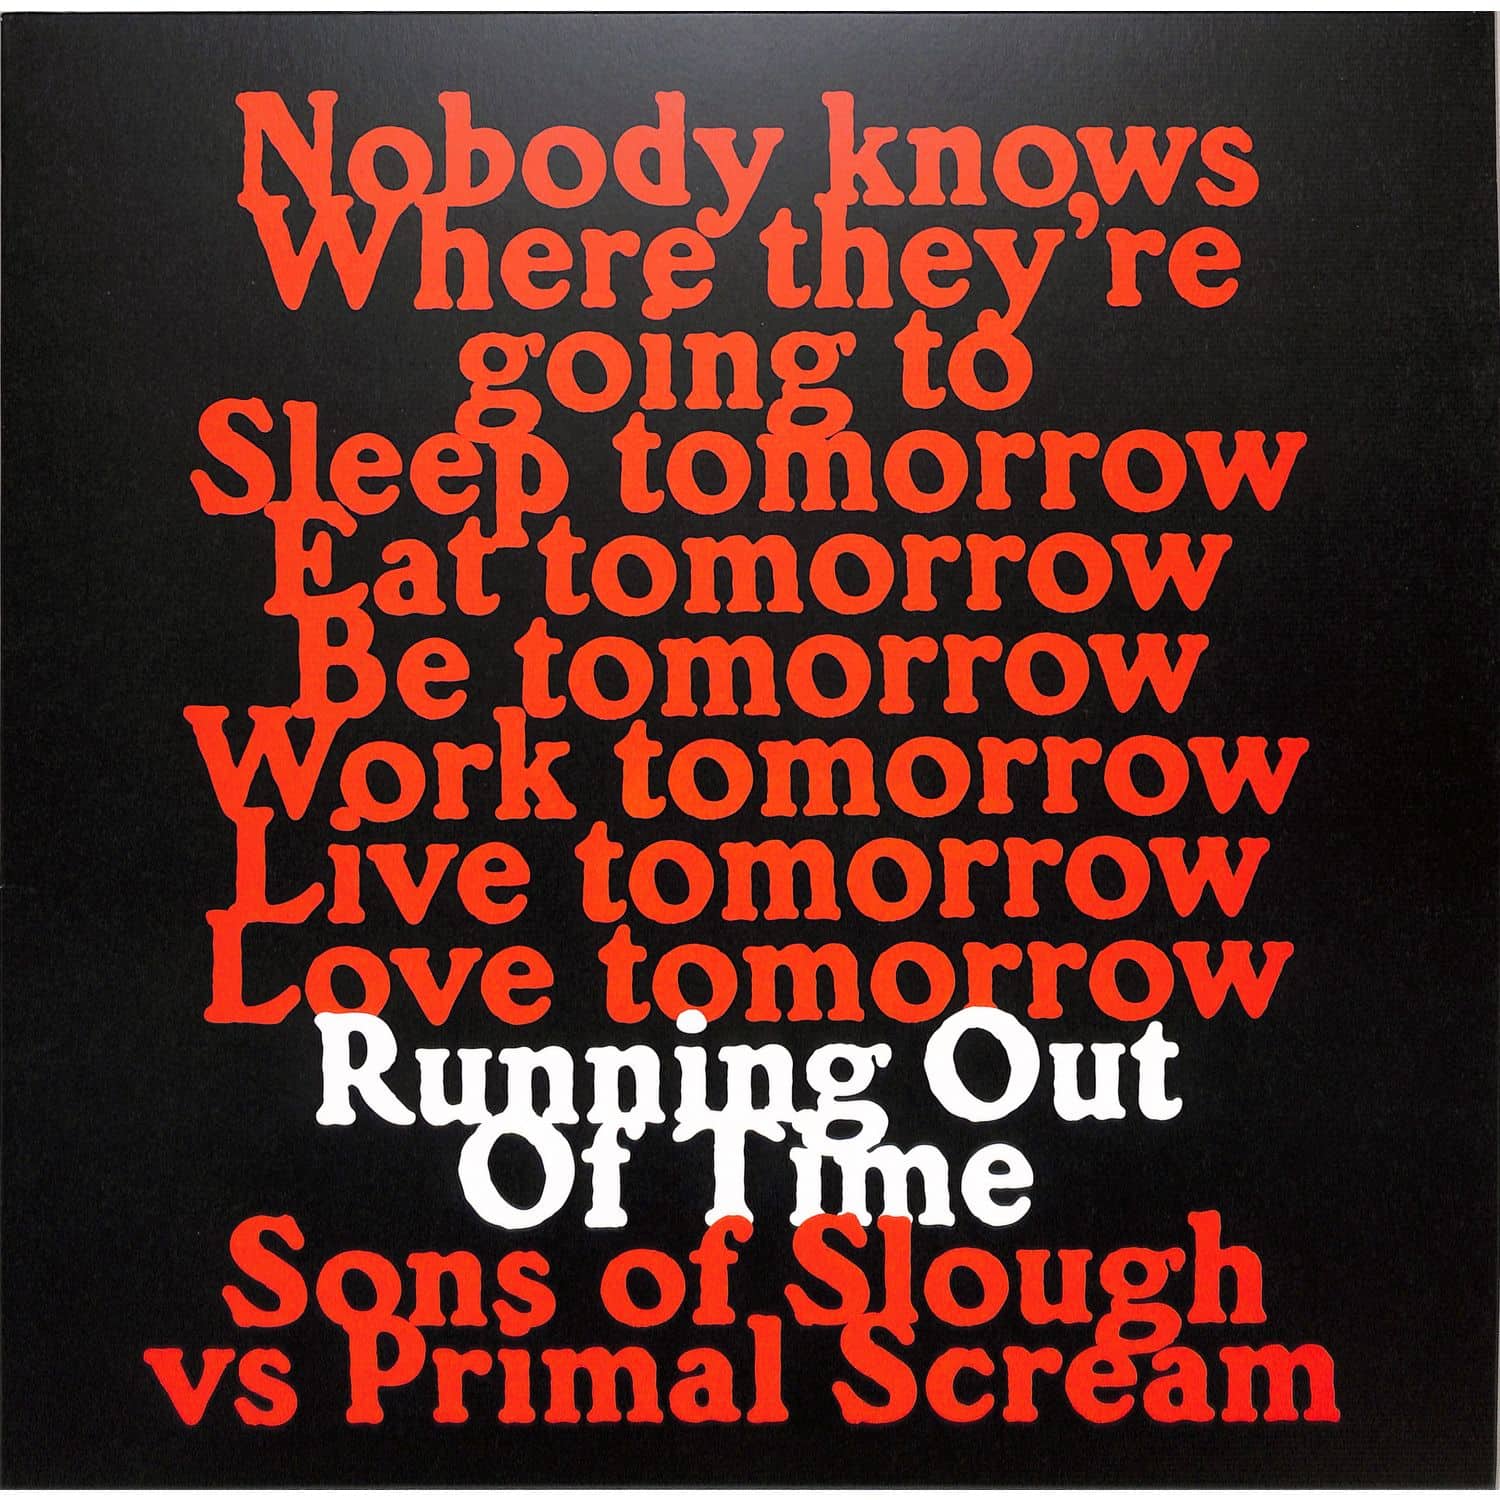 Sons Of Slough vs Primal Scream - RUNNING OUT OF TIME